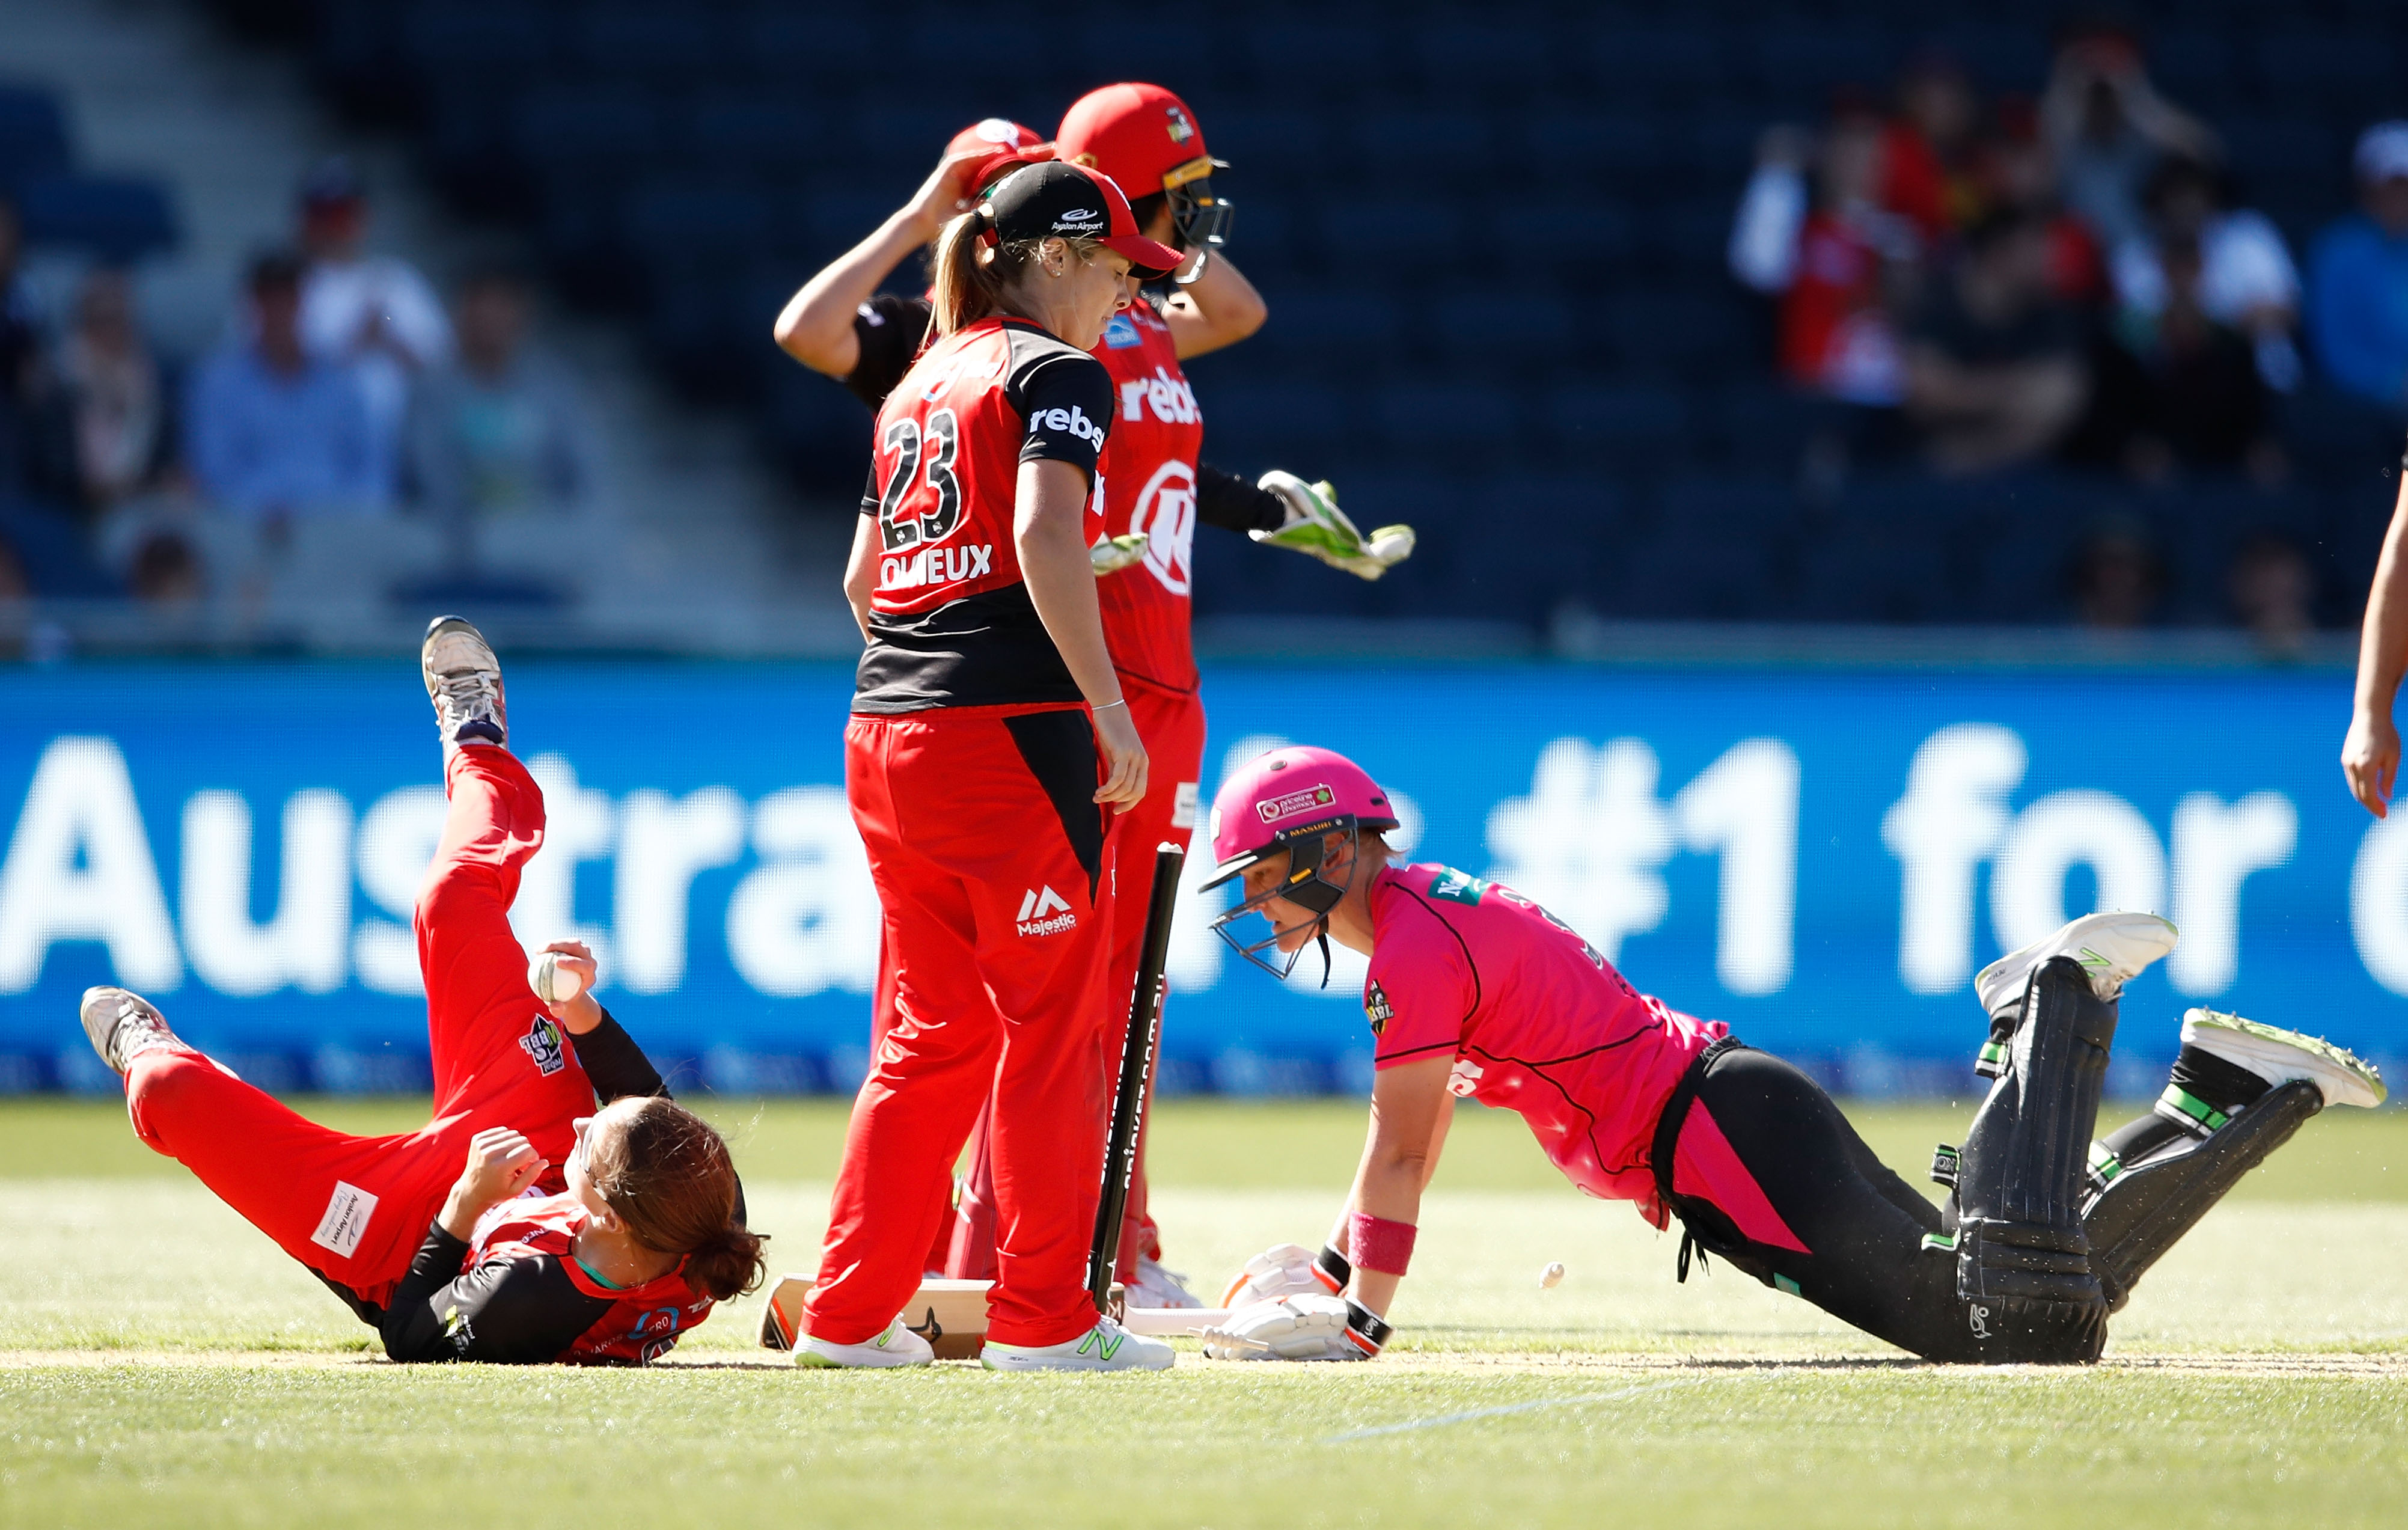 WATCH: Brilliant piece of awareness from Sarah Aley takes the game to an unlikely Super Over